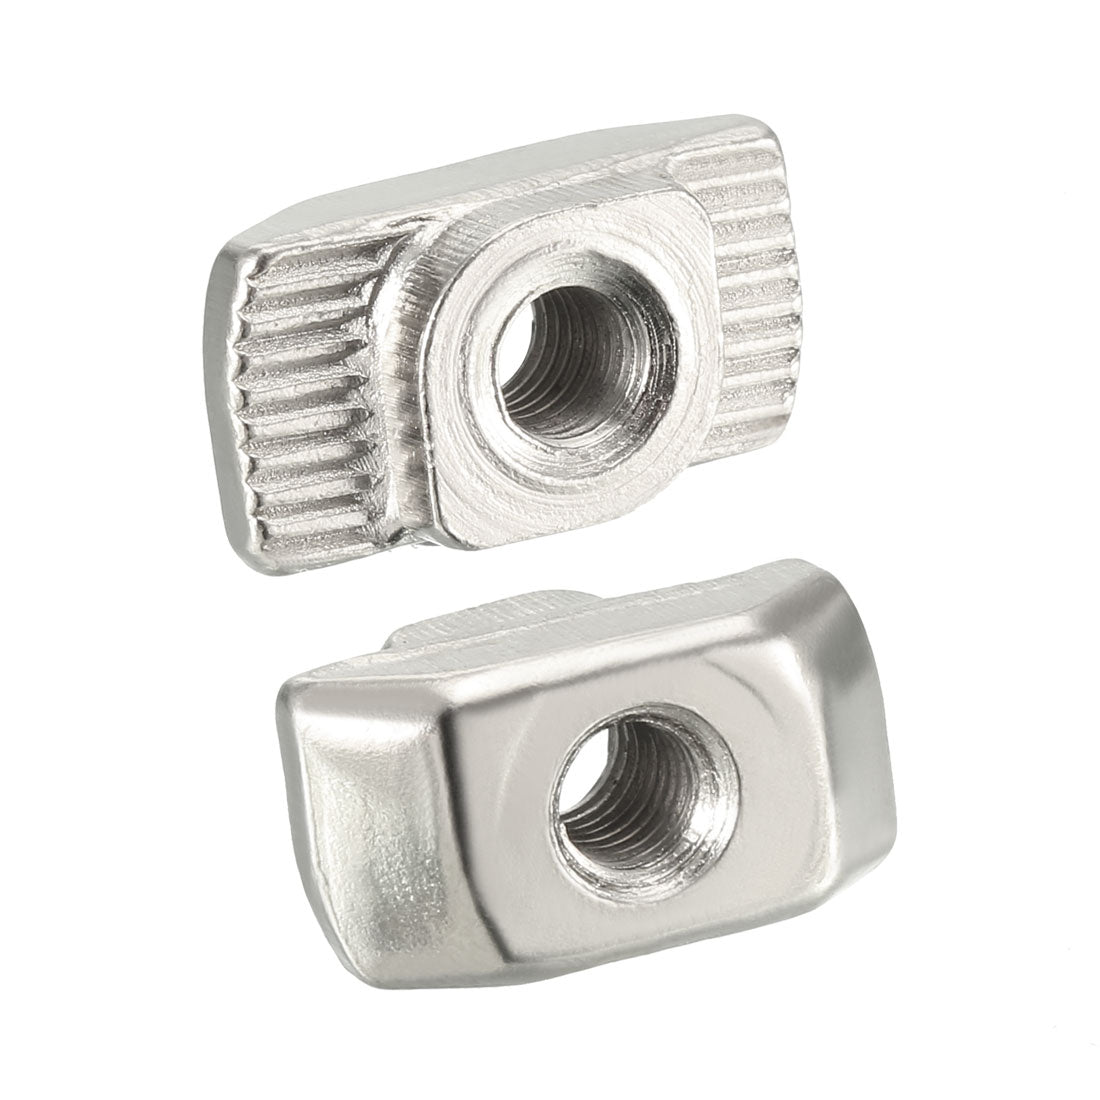 Uxcell Uxcell Sliding T Slot Nuts, M6 Thread for 4545 Series Aluminum Extrusion Profile 10pcs